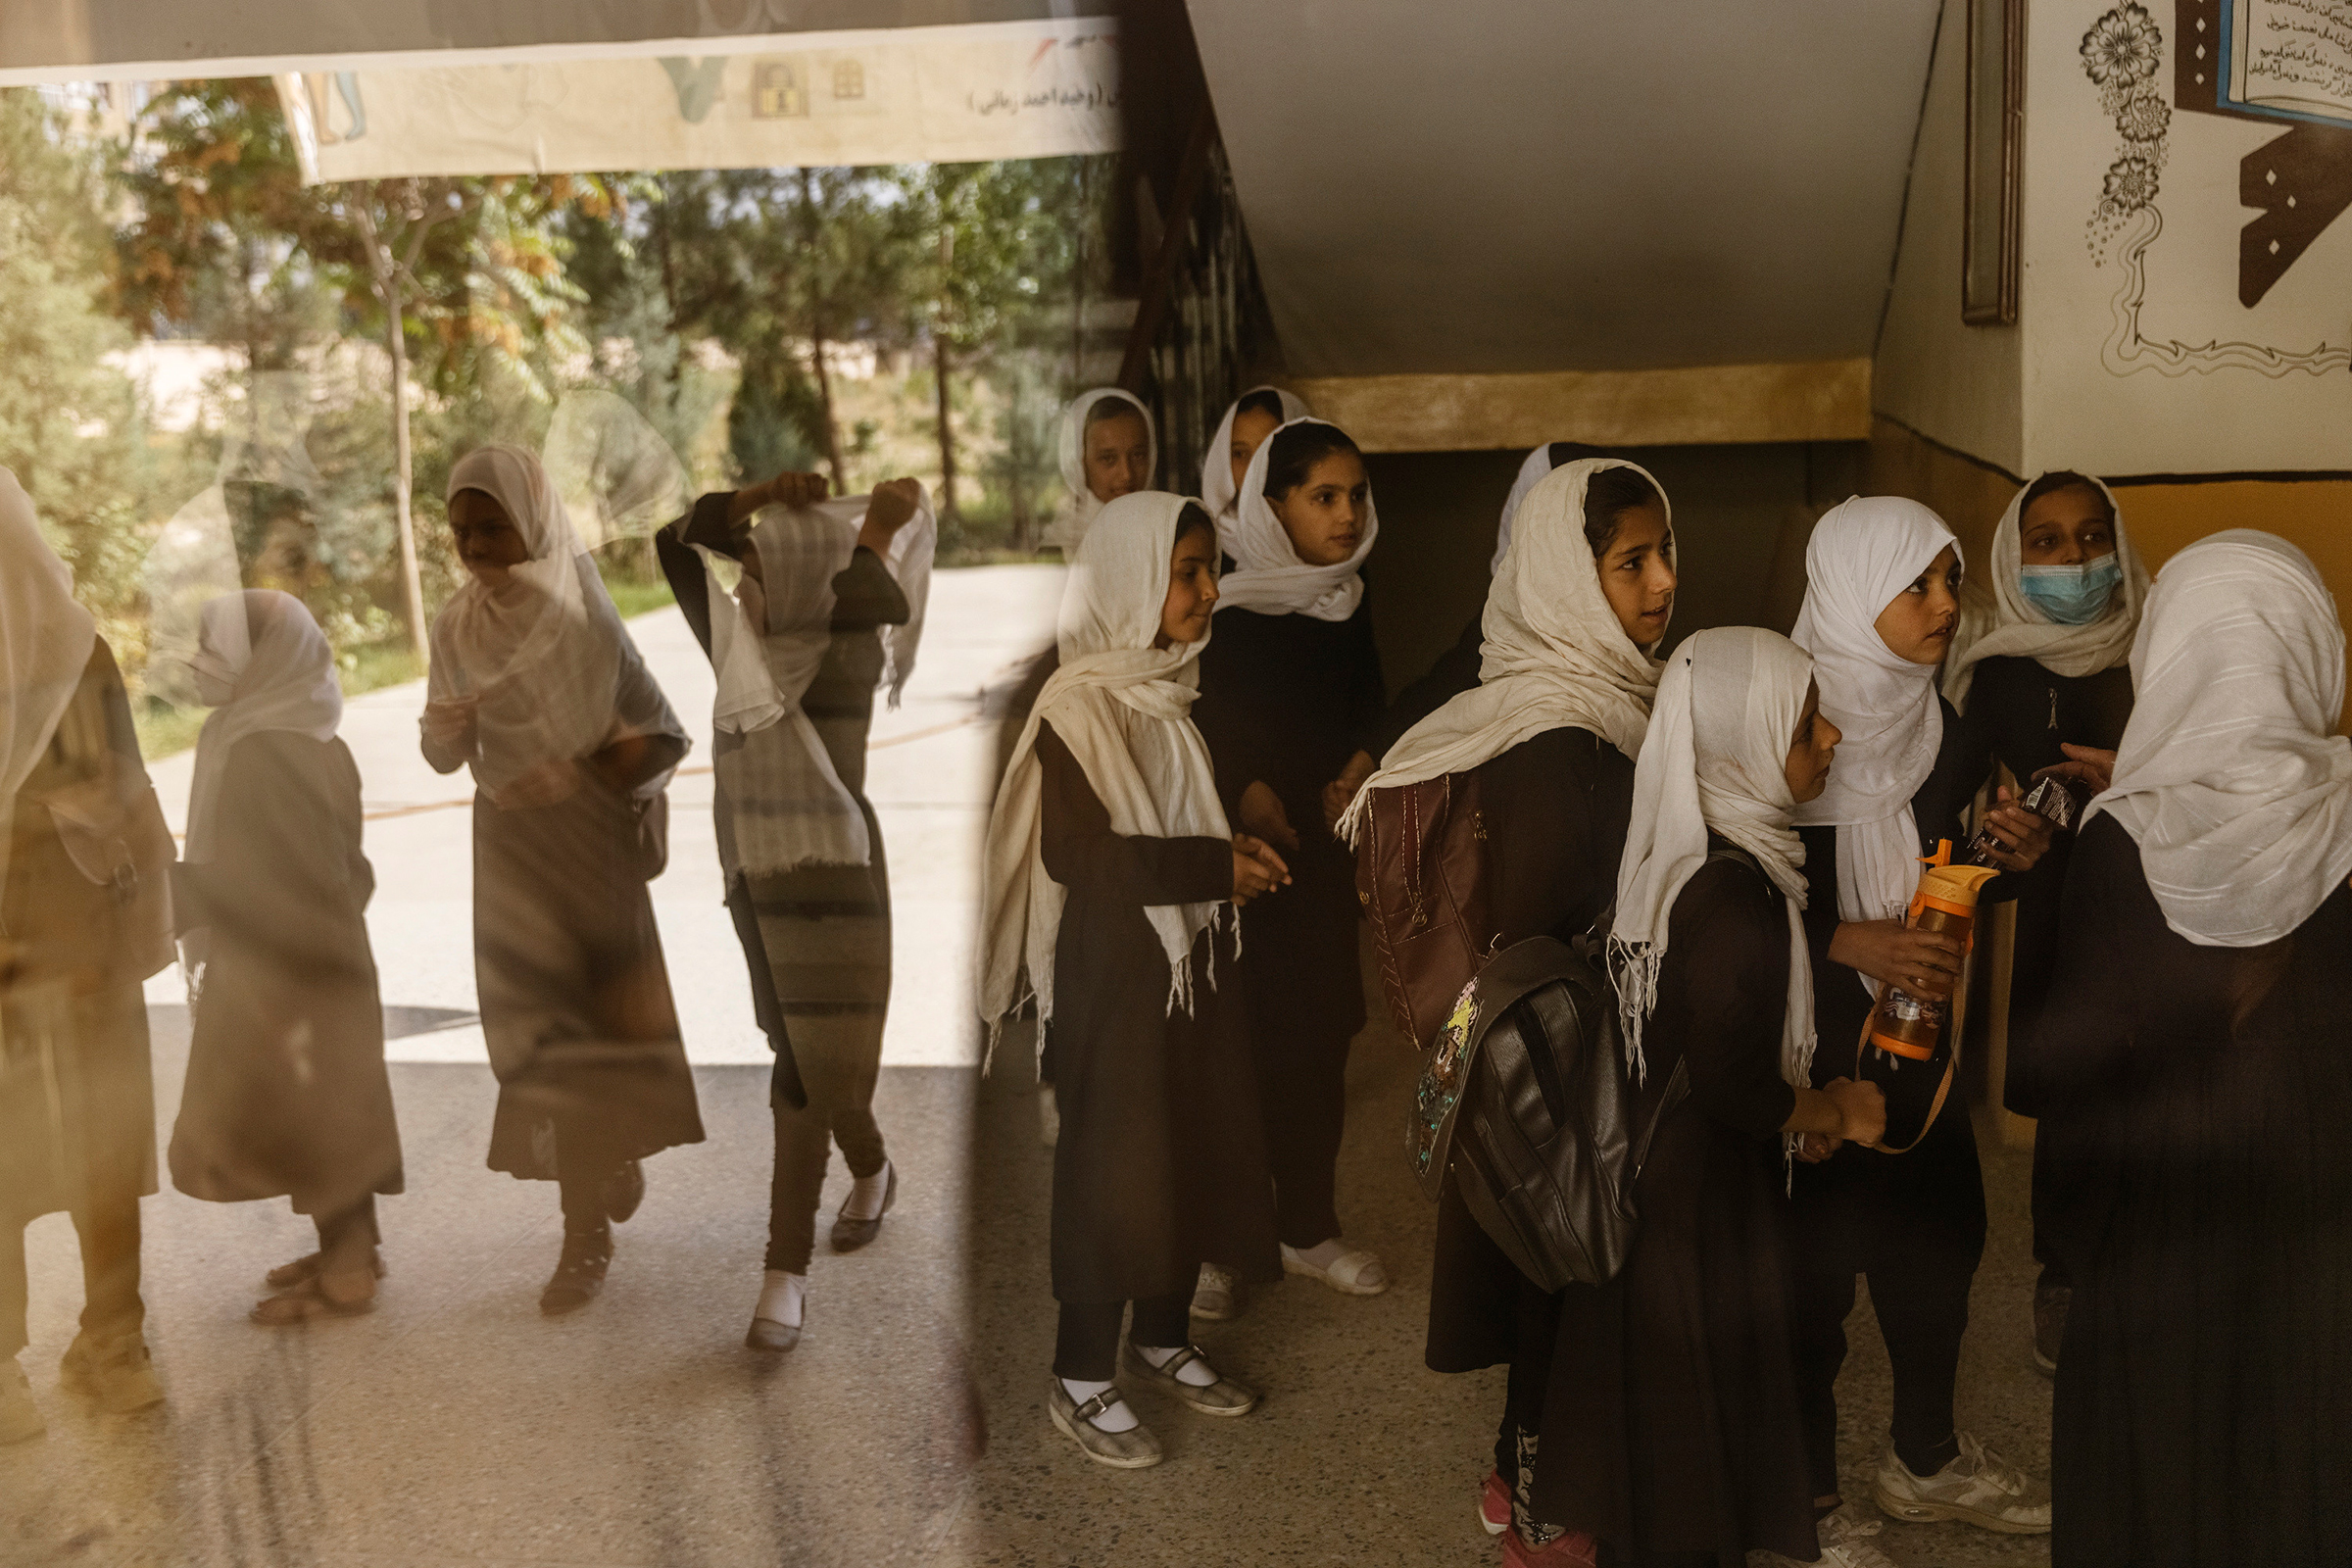 Schoolgirls wait for a class in Kabul on Sept. 15. (Victor J. Blue—The New York Times/Redux)